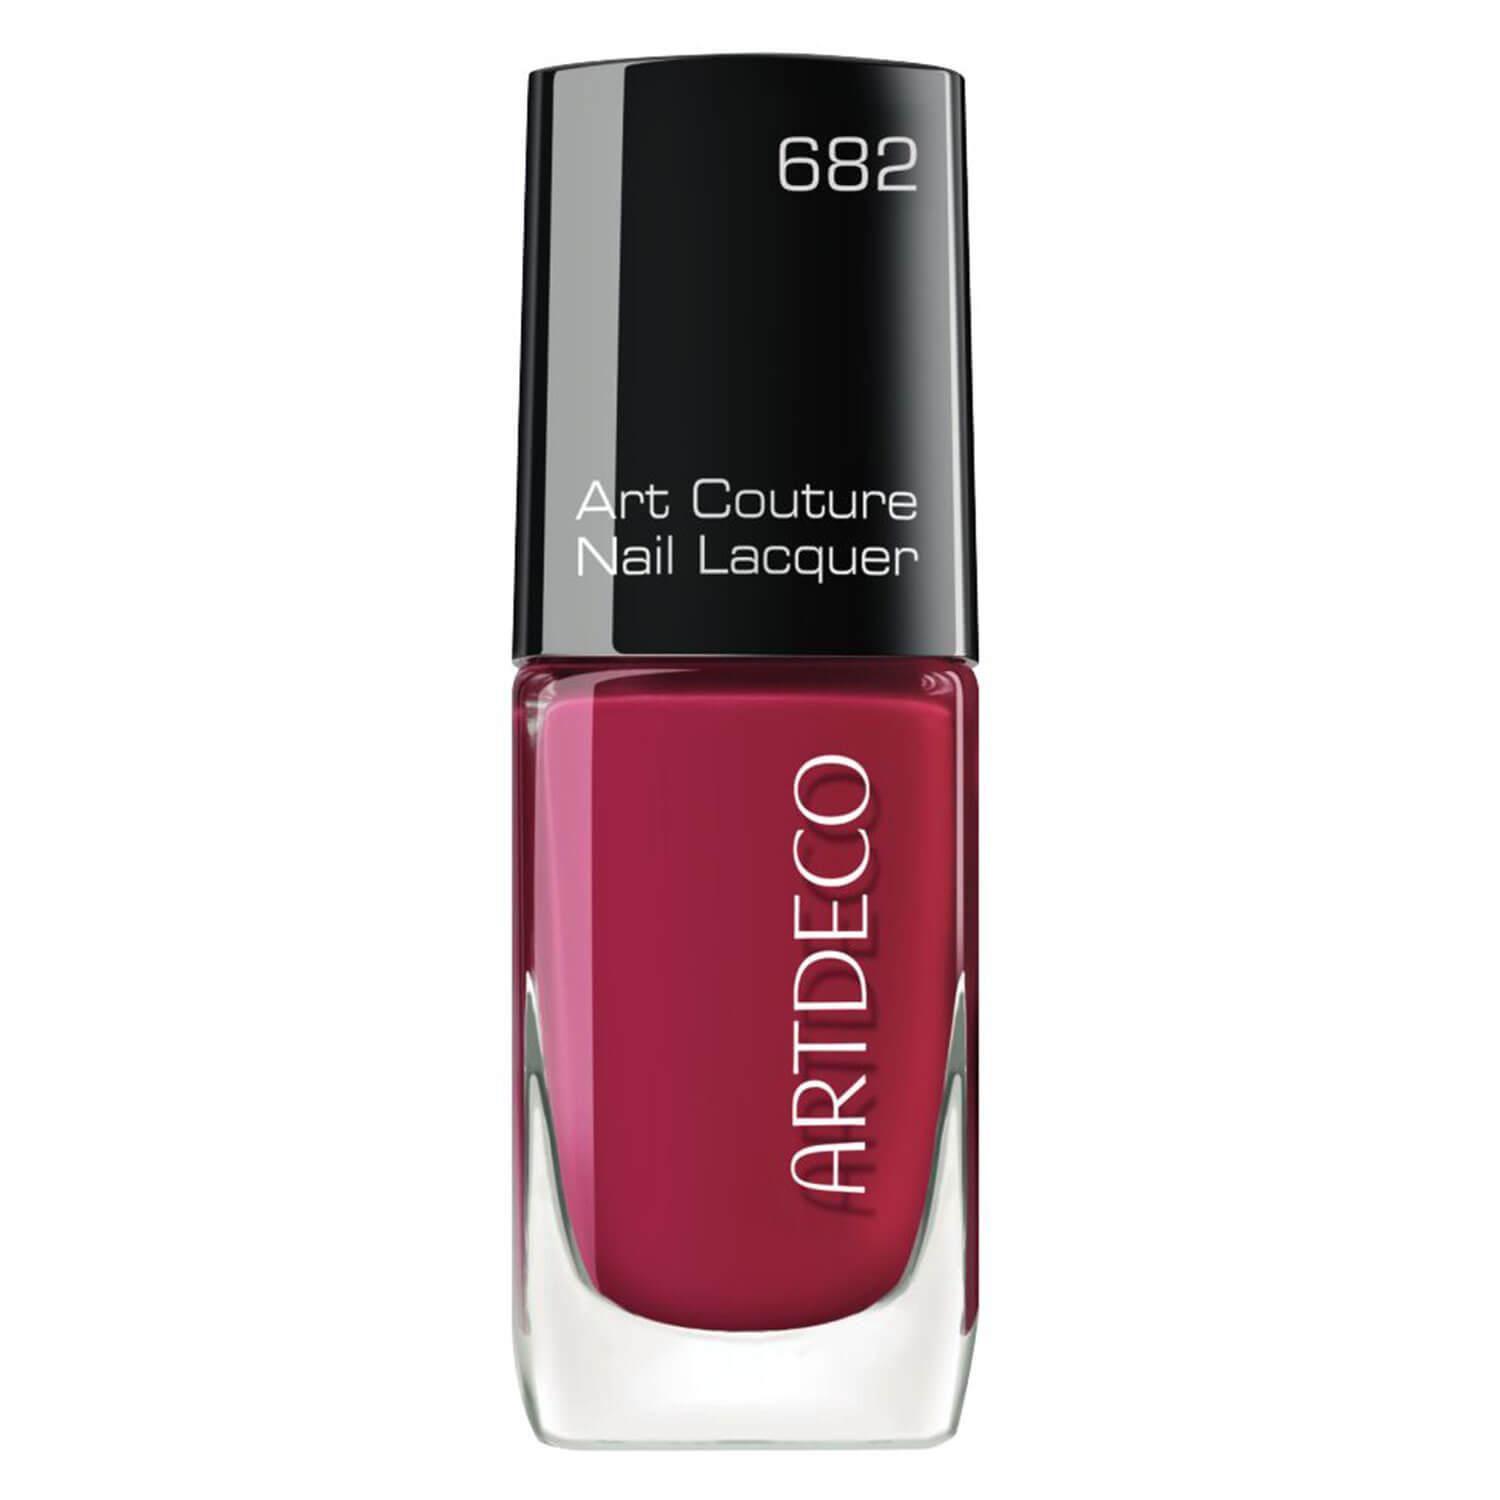 Art Couture - Nail Lacquer Wild Berry 682